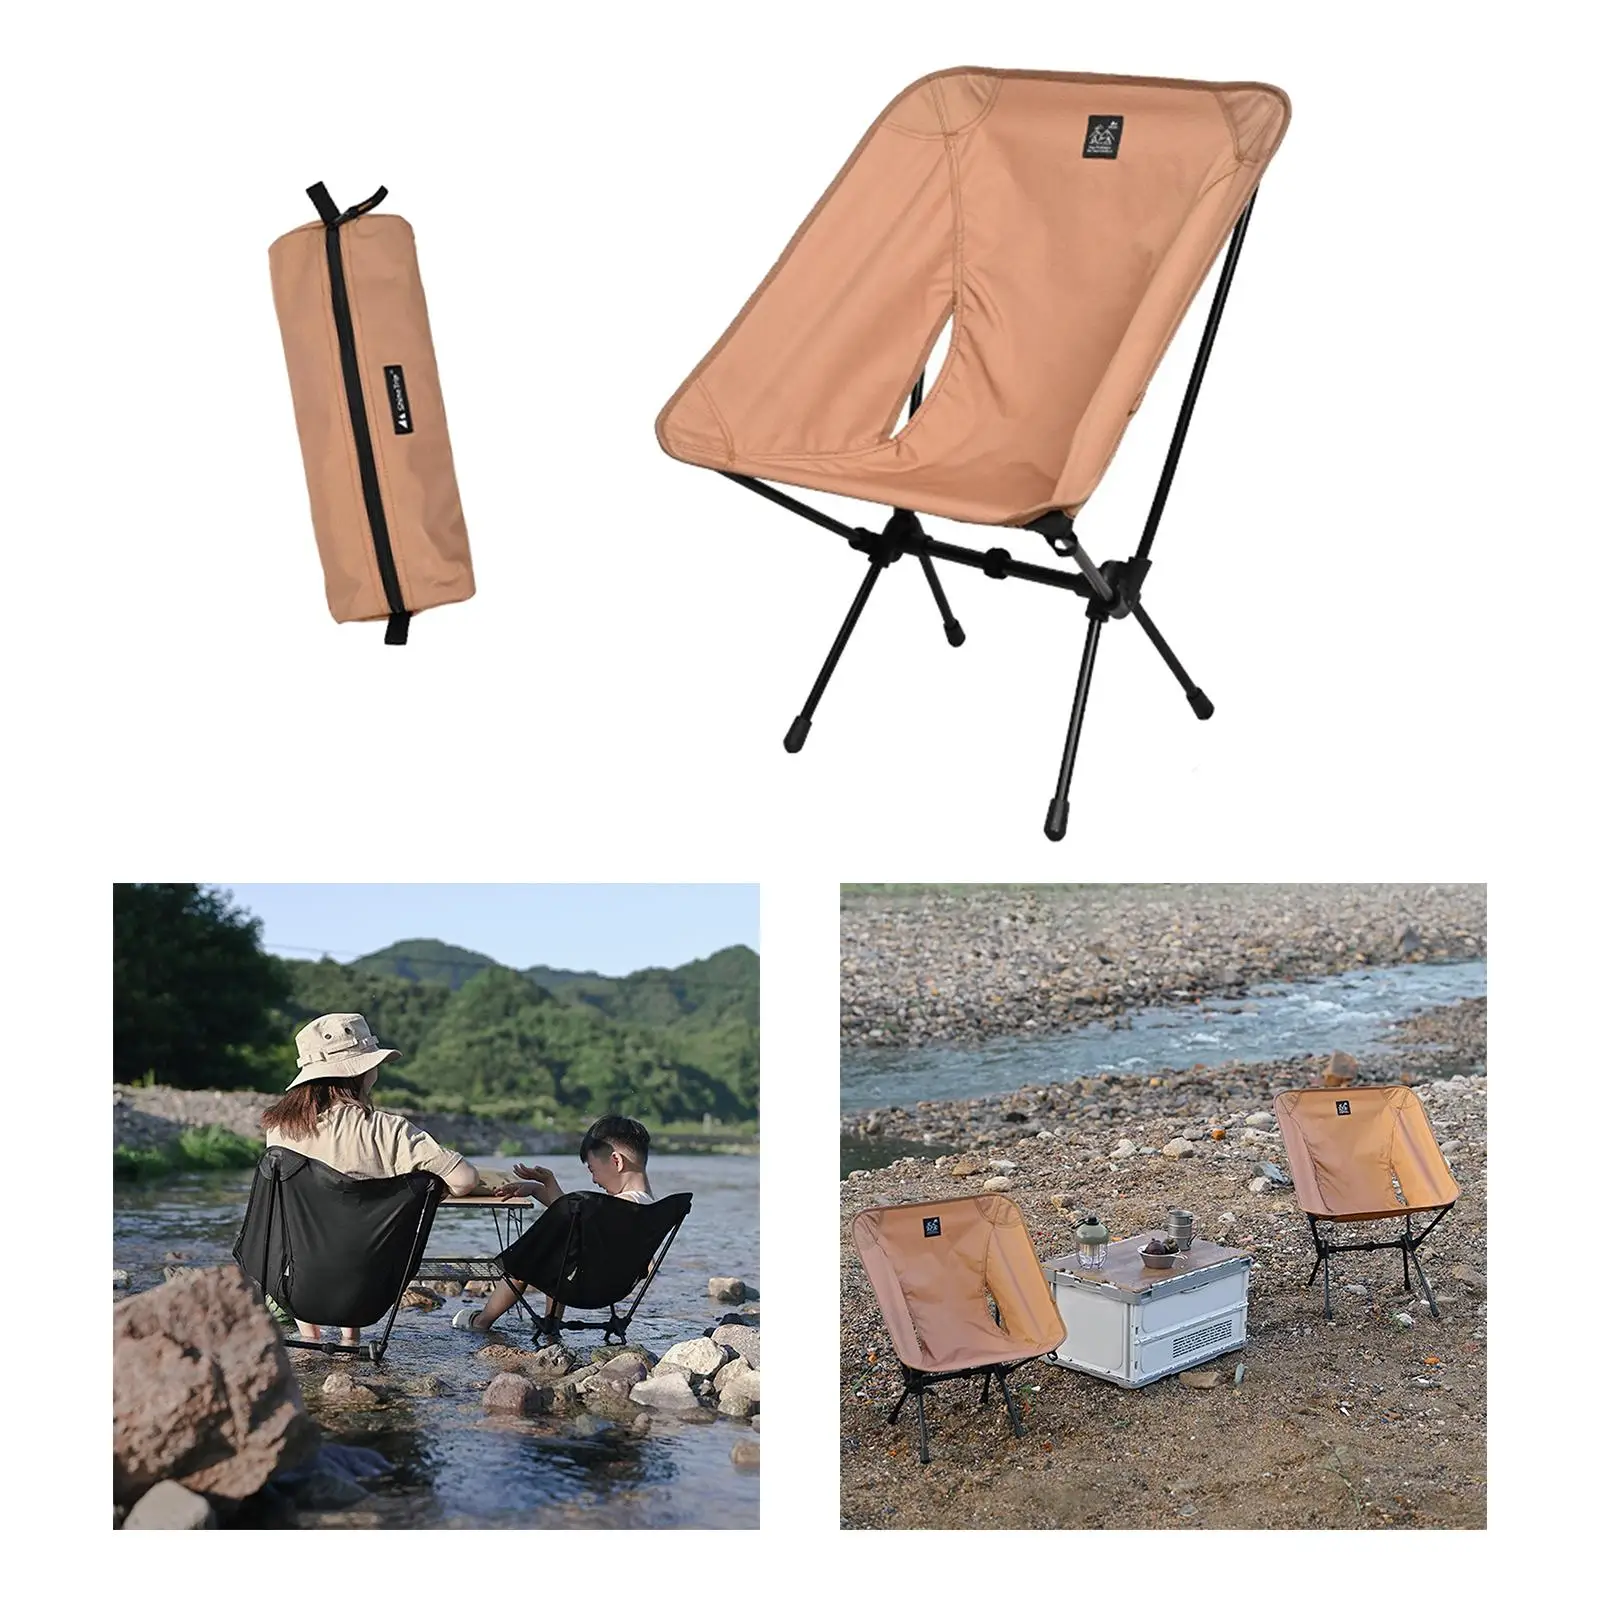 Aluminum Alloy Frame Outdoor Camping Armchair Camp Supplies Stool Lightweight Foldable Moon Chair for Backpacking Hiking